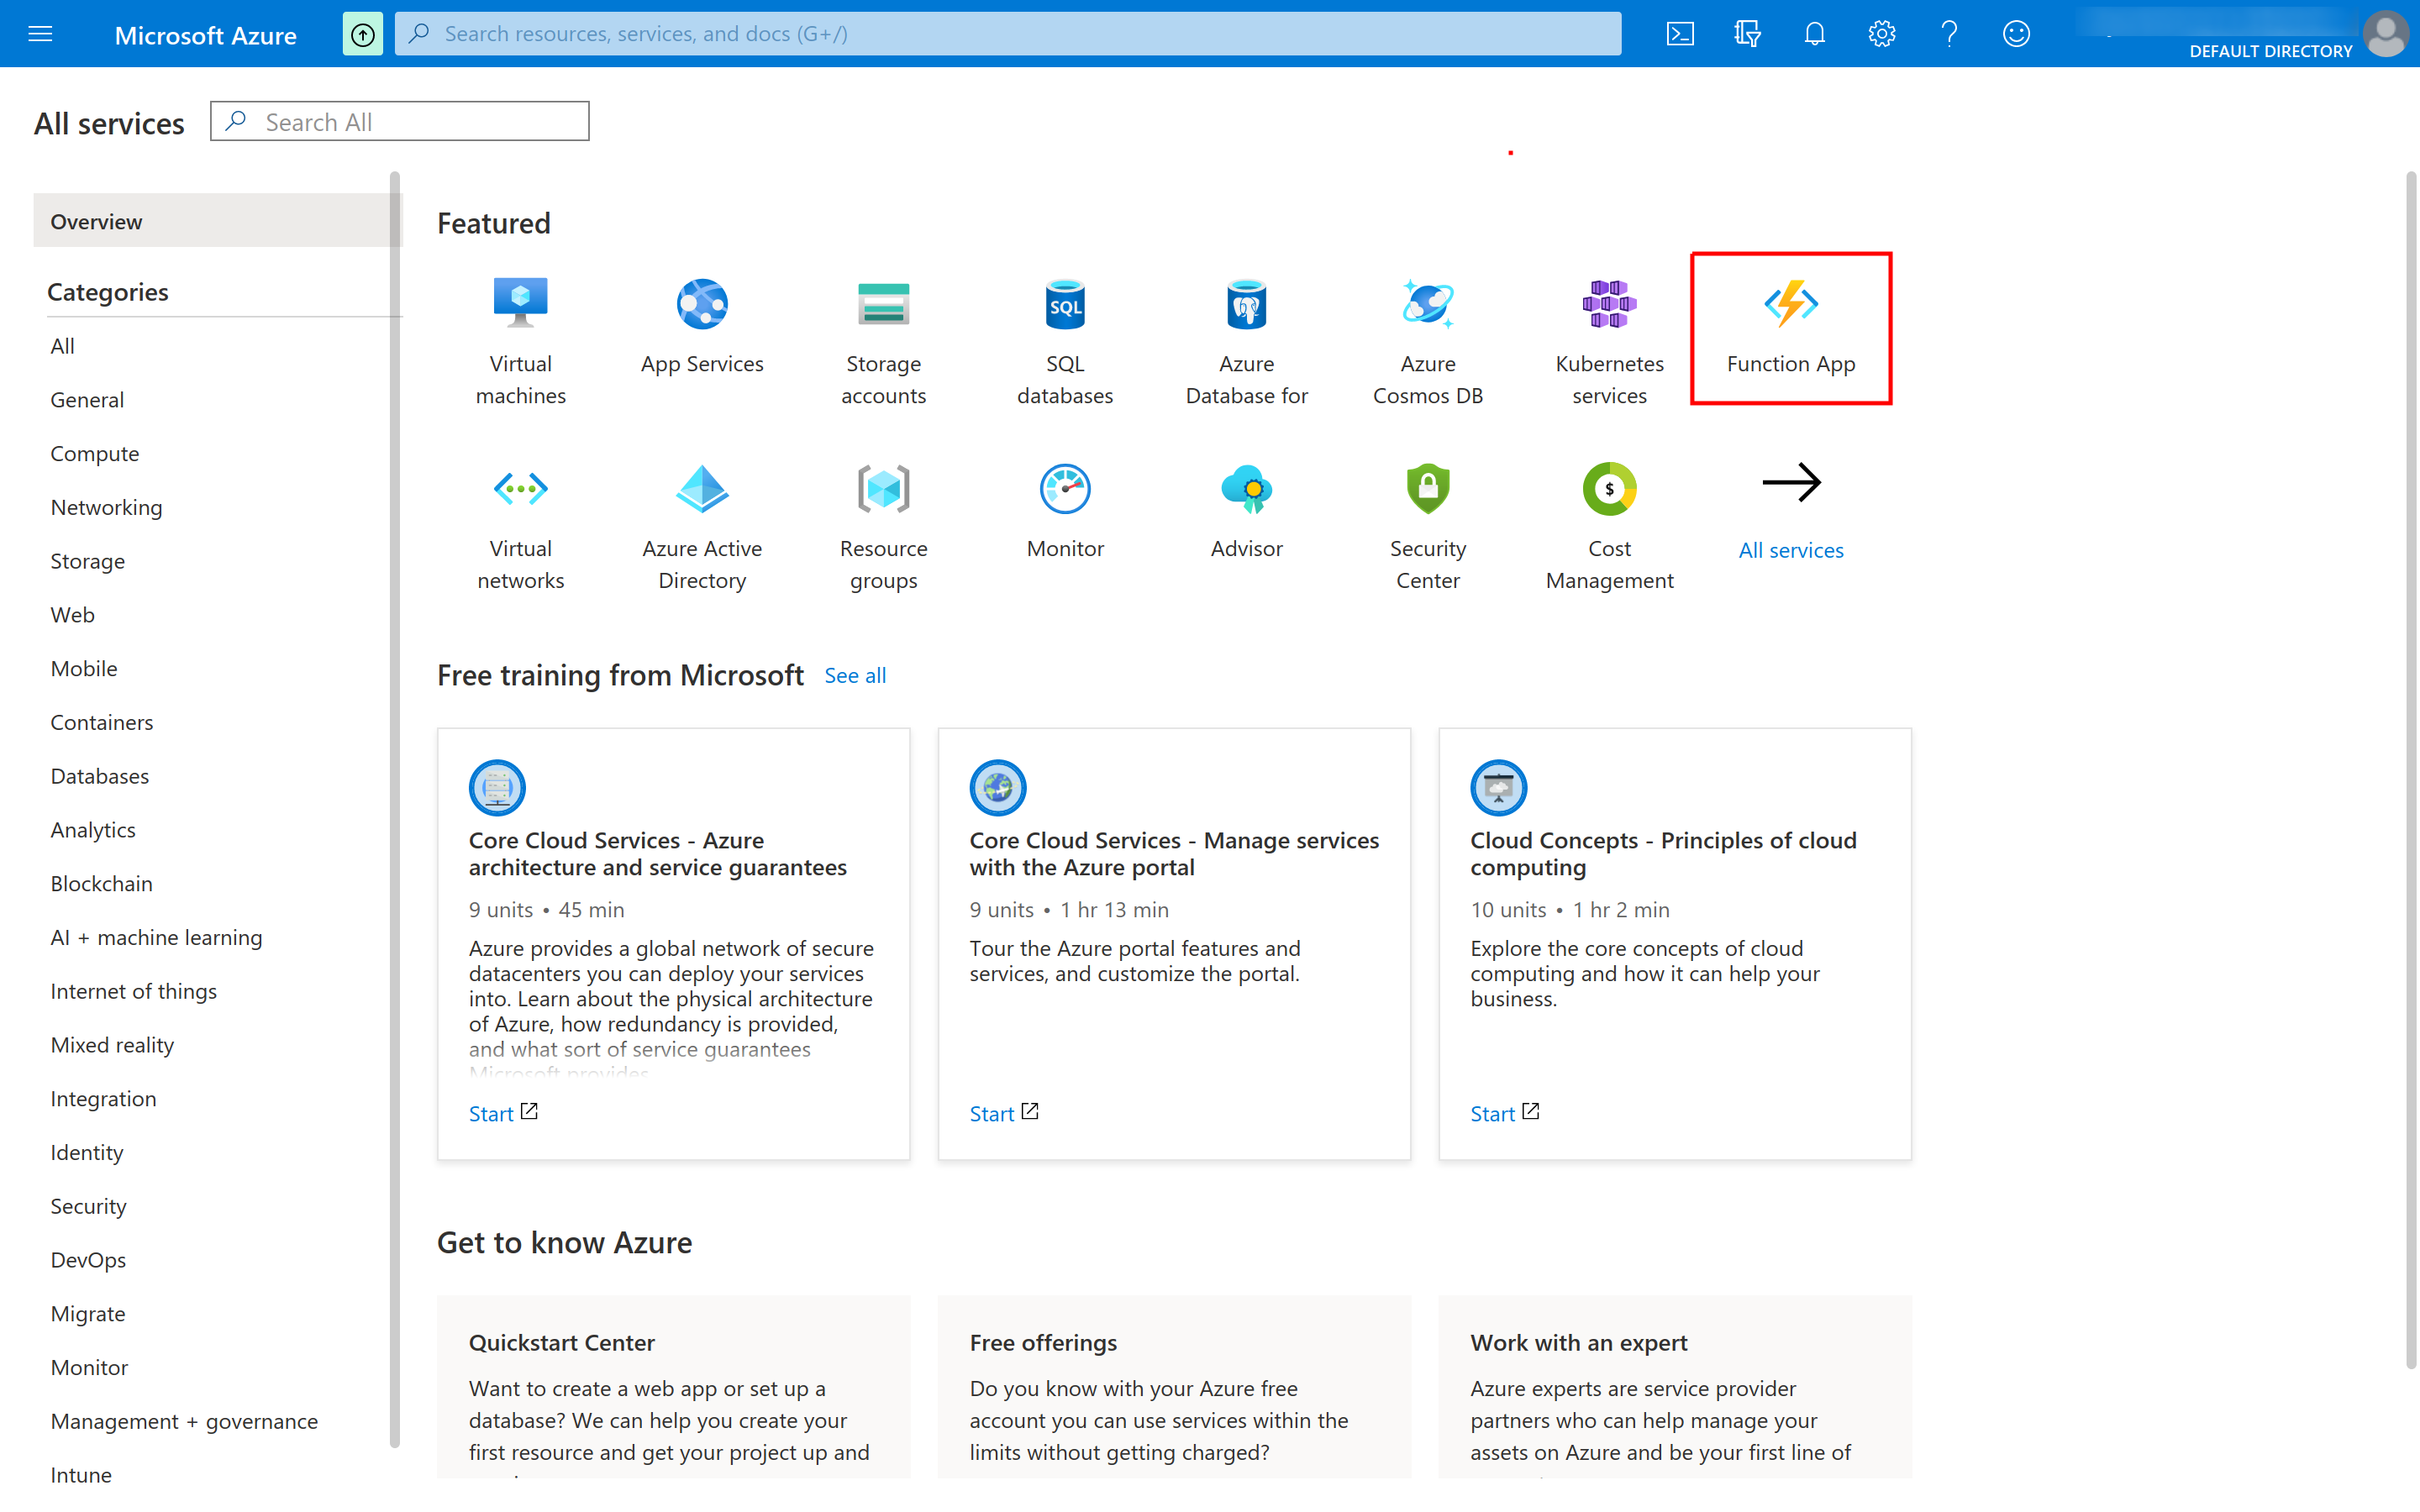 azure-services-dashboard.png